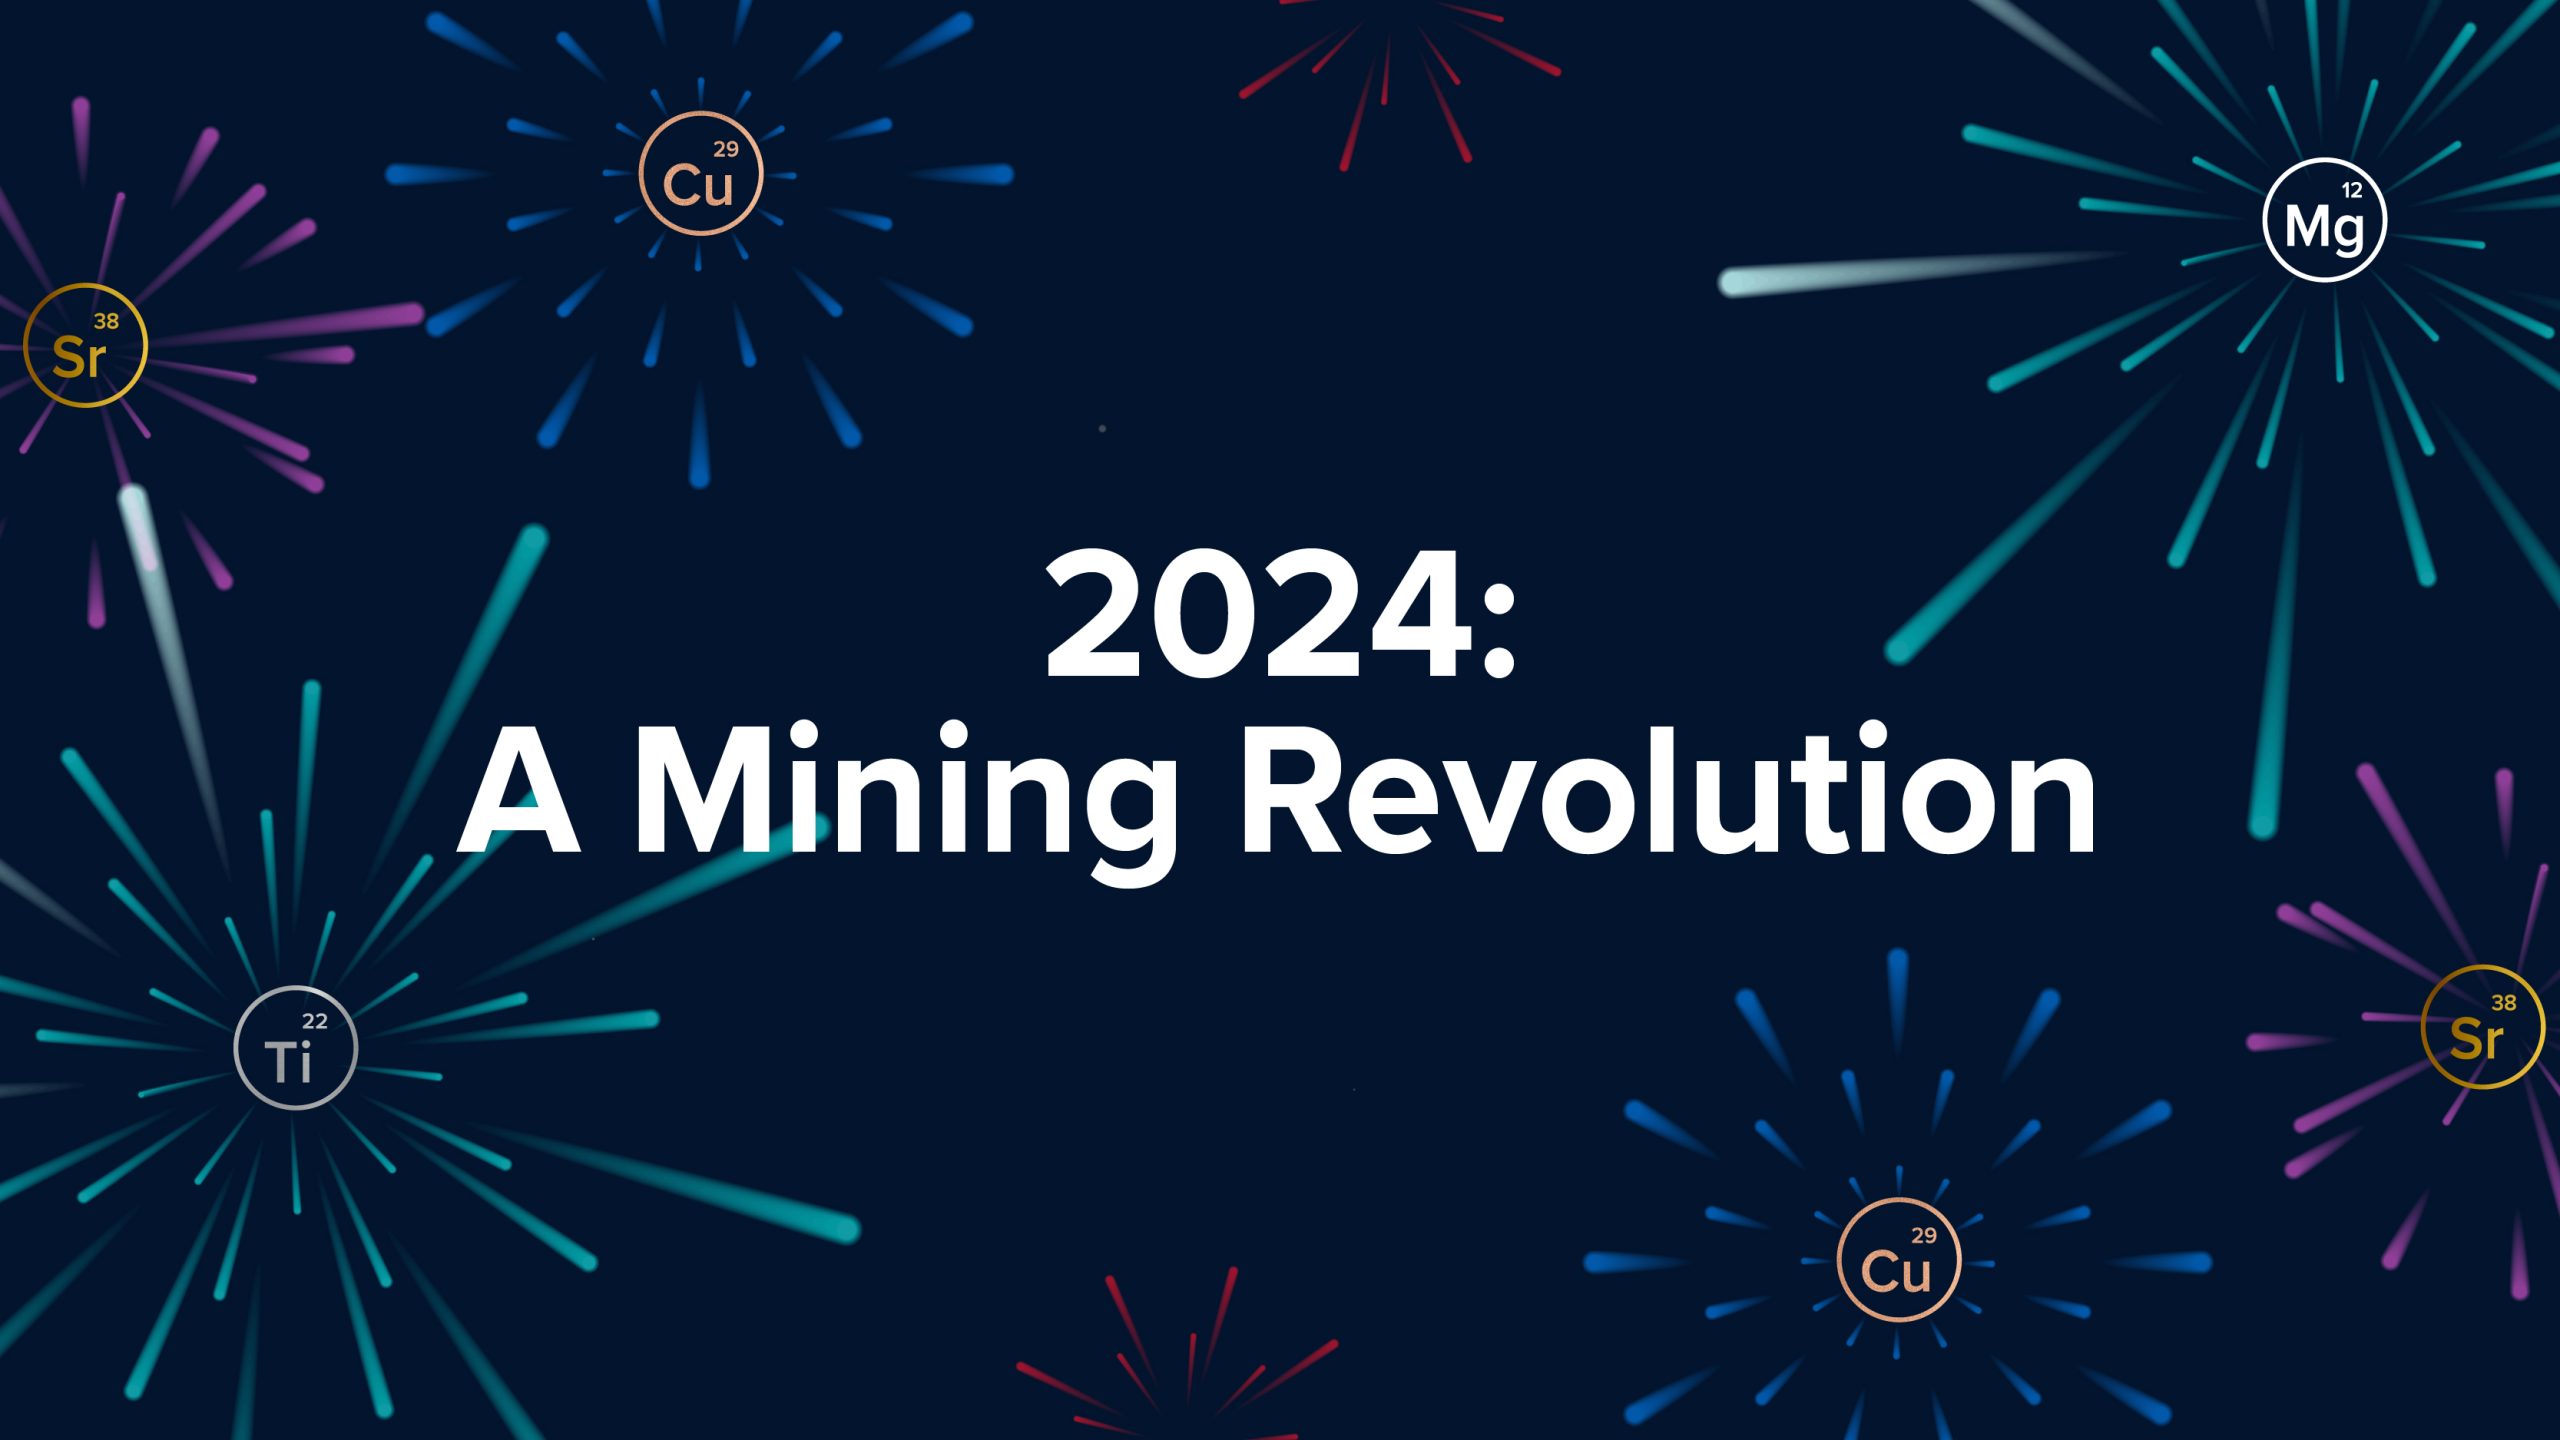 Support domestic mining in 2024